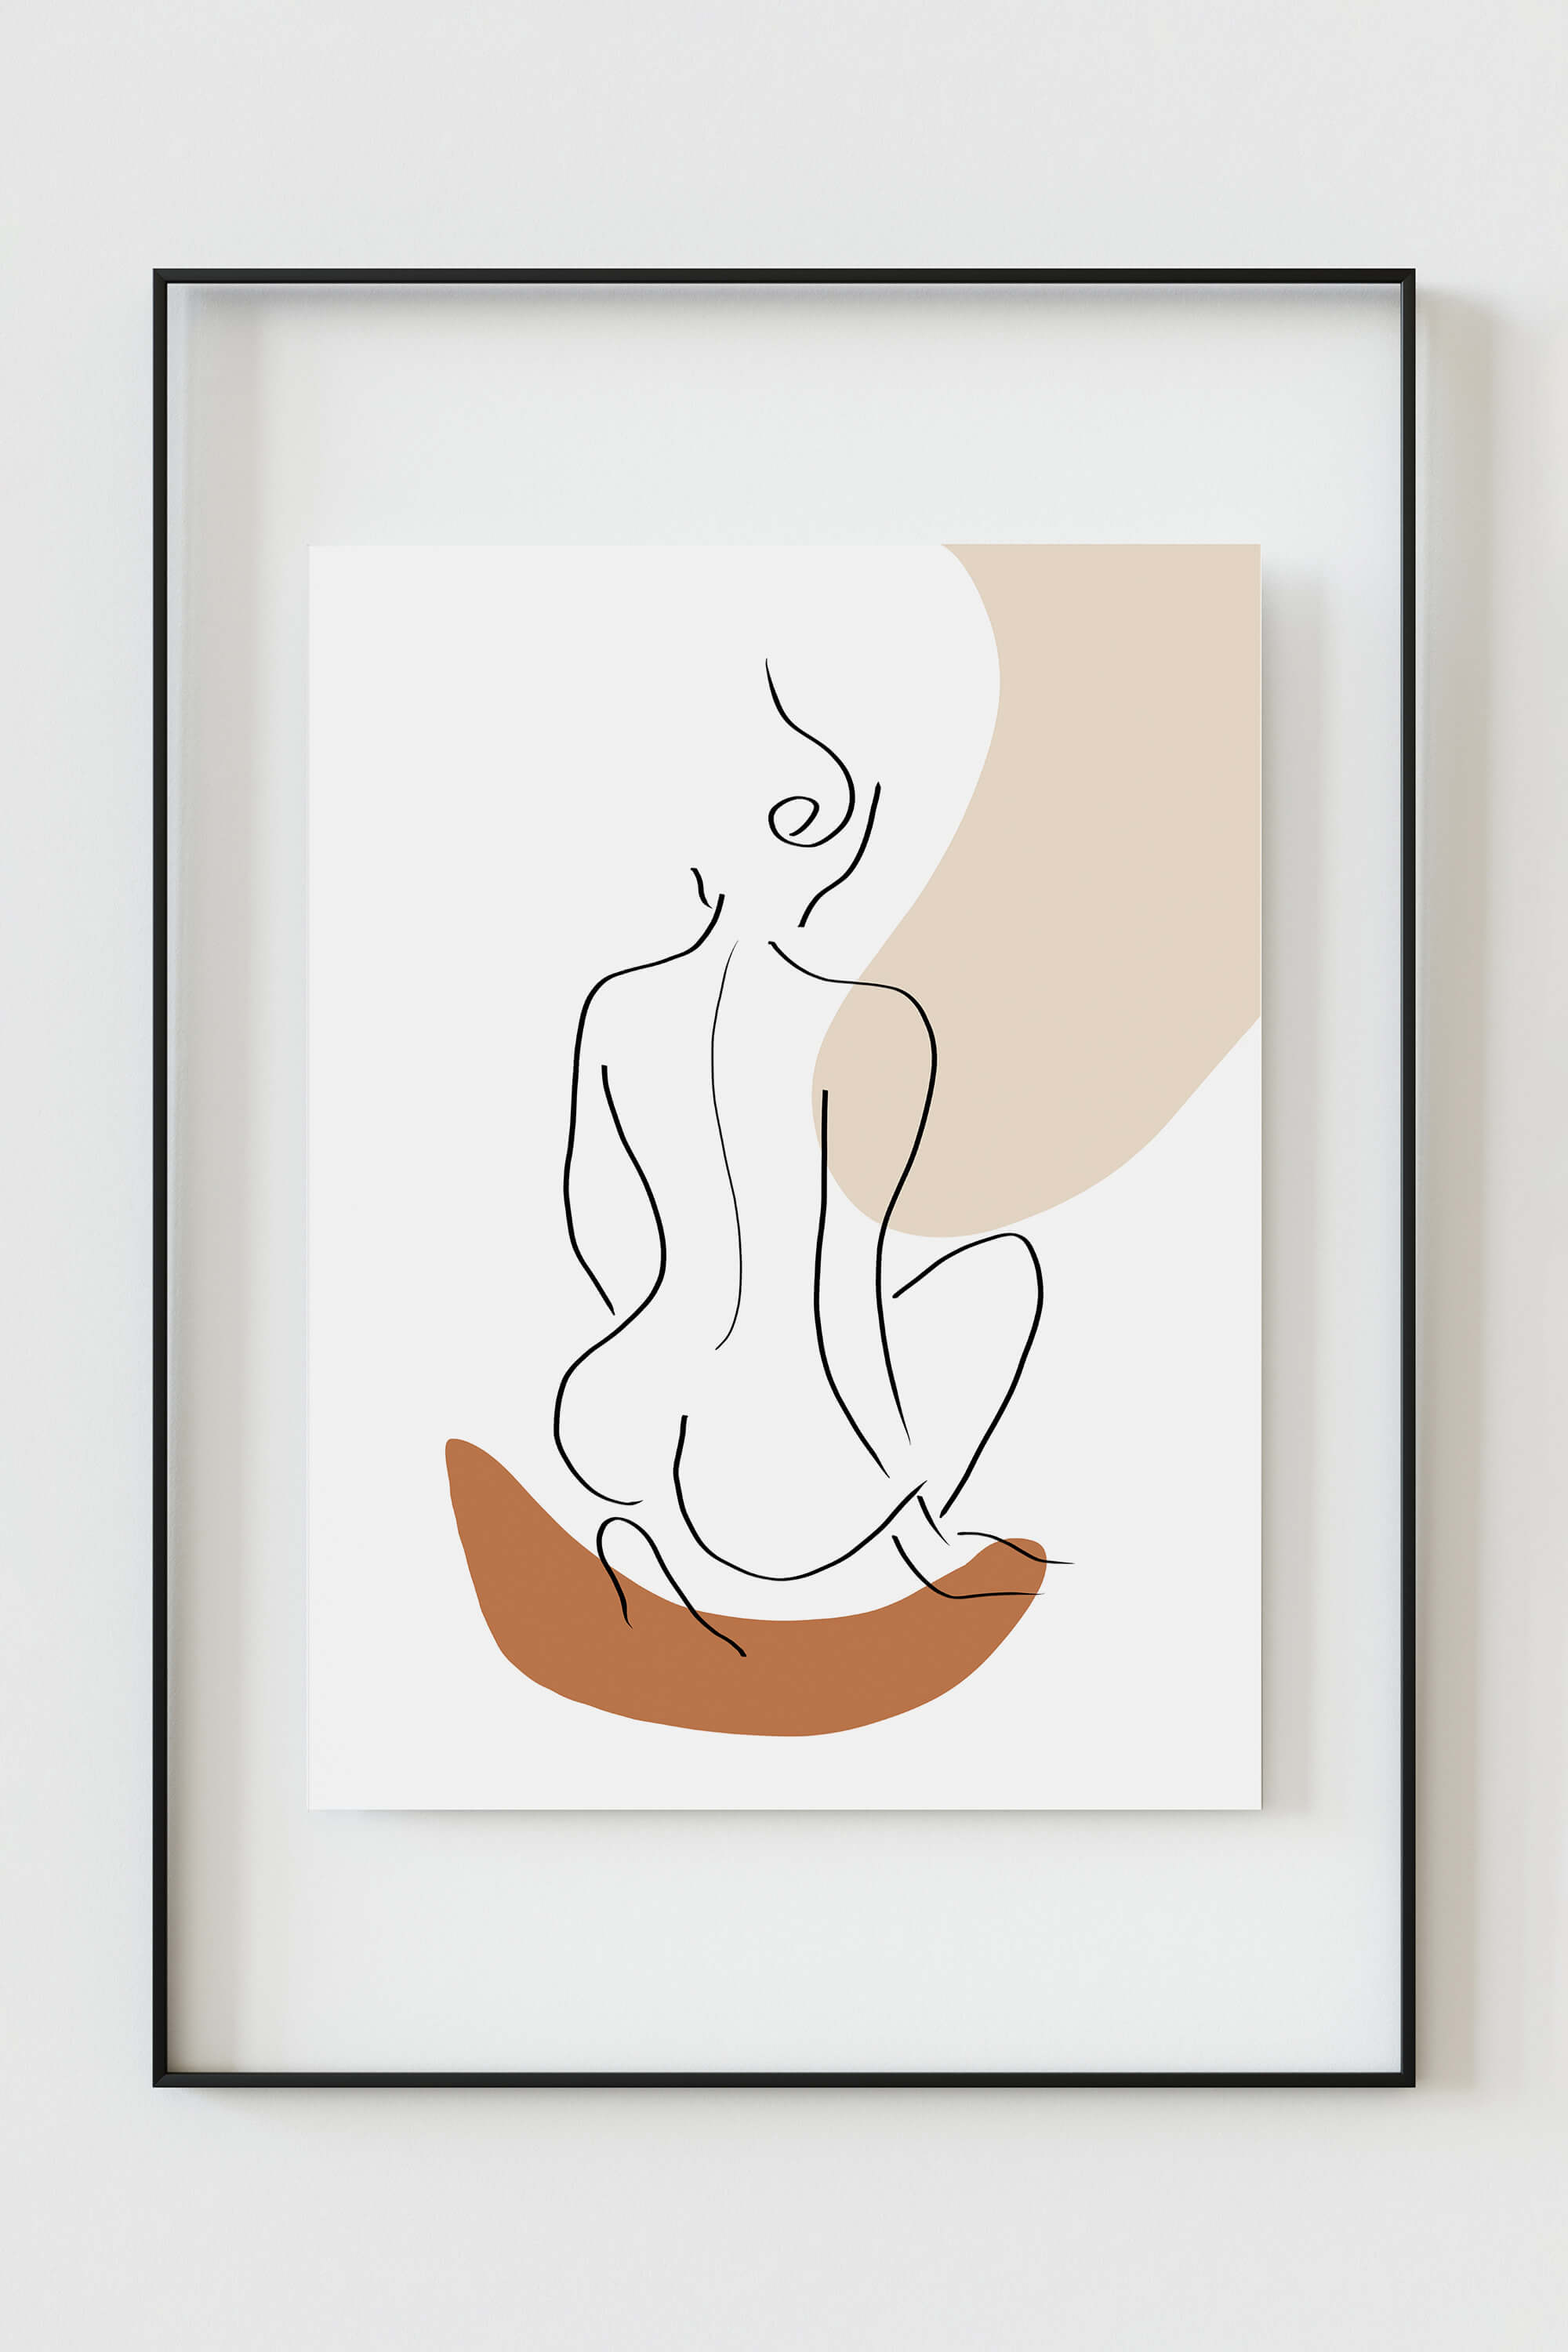 Minimalist art print of a woman's back, bringing modern simplicity to interior spaces.